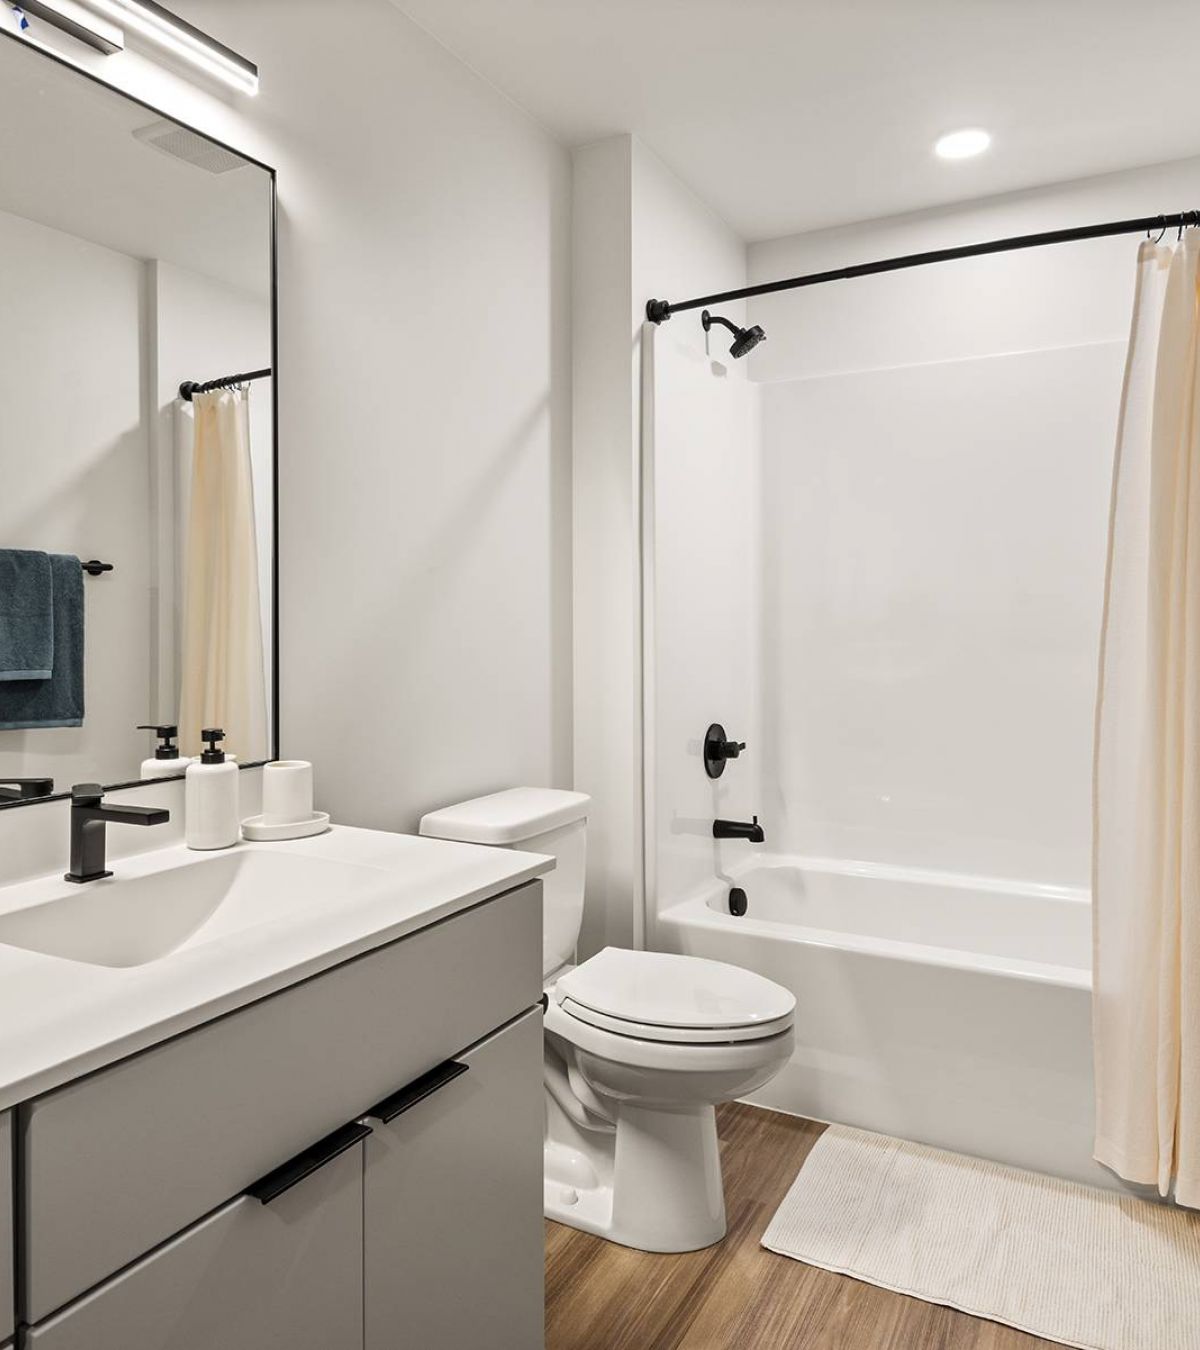 O2 Luxury Towers apartments bathroom with spacious countertop space, cabinets, toilet, and in-shower bathtub. 